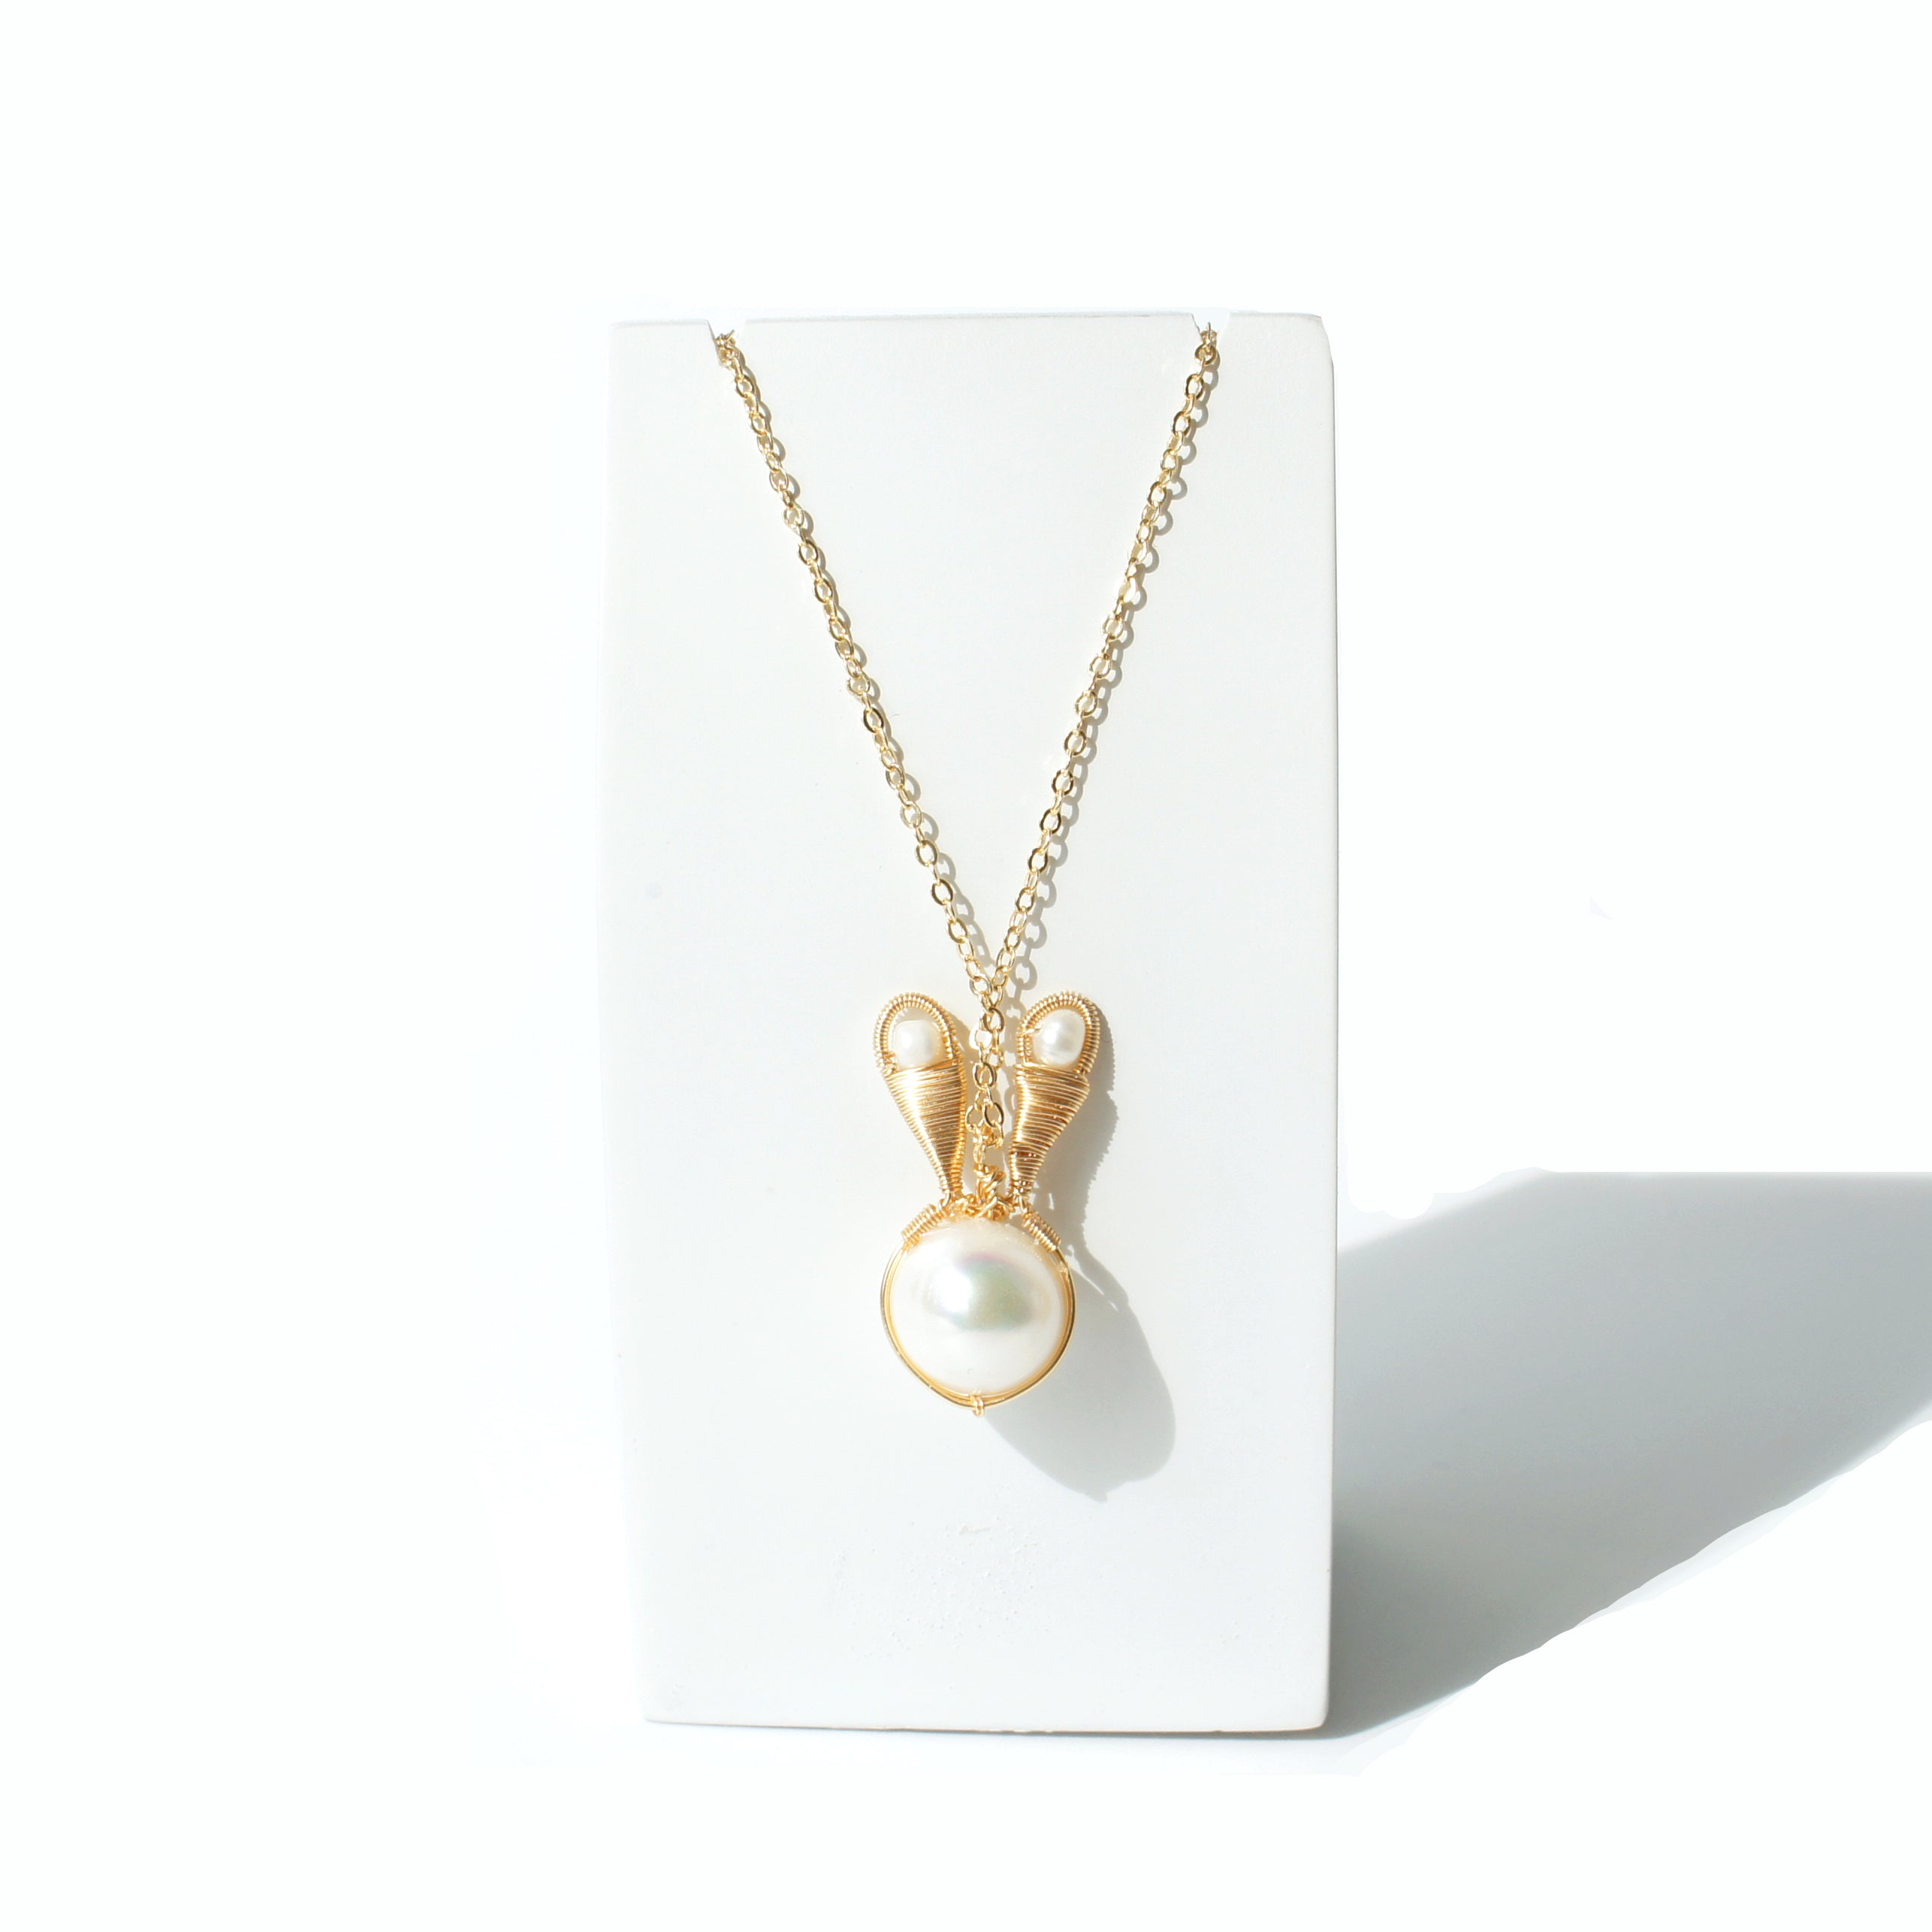 Pearl Bunny Necklace, 12mm Freshwater Pearl